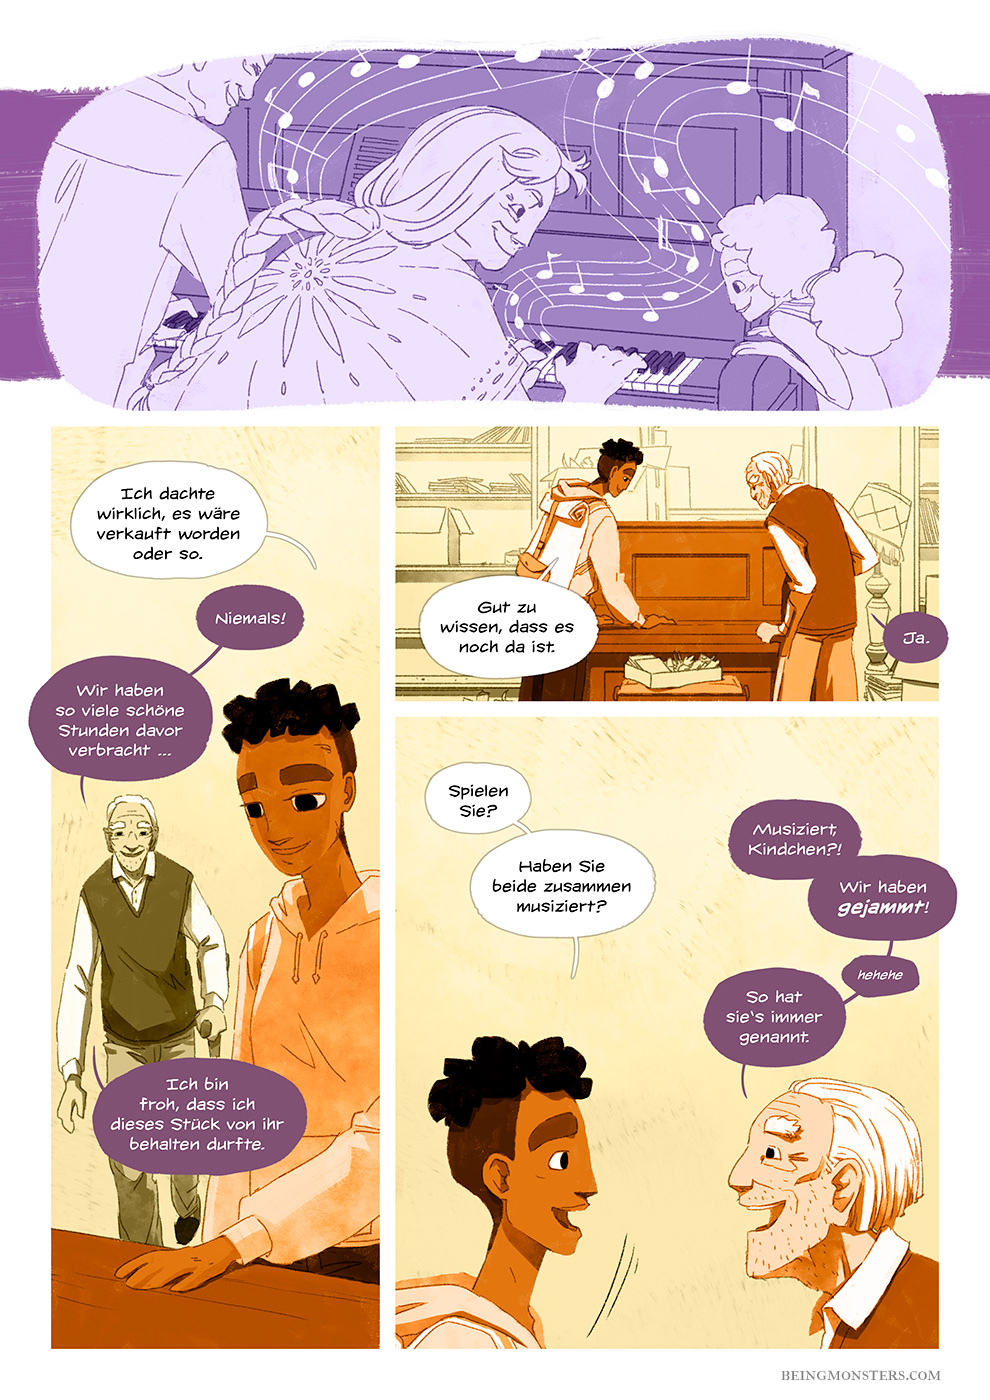 Being Monsters Book 1 Chapter 4 page 27 EN